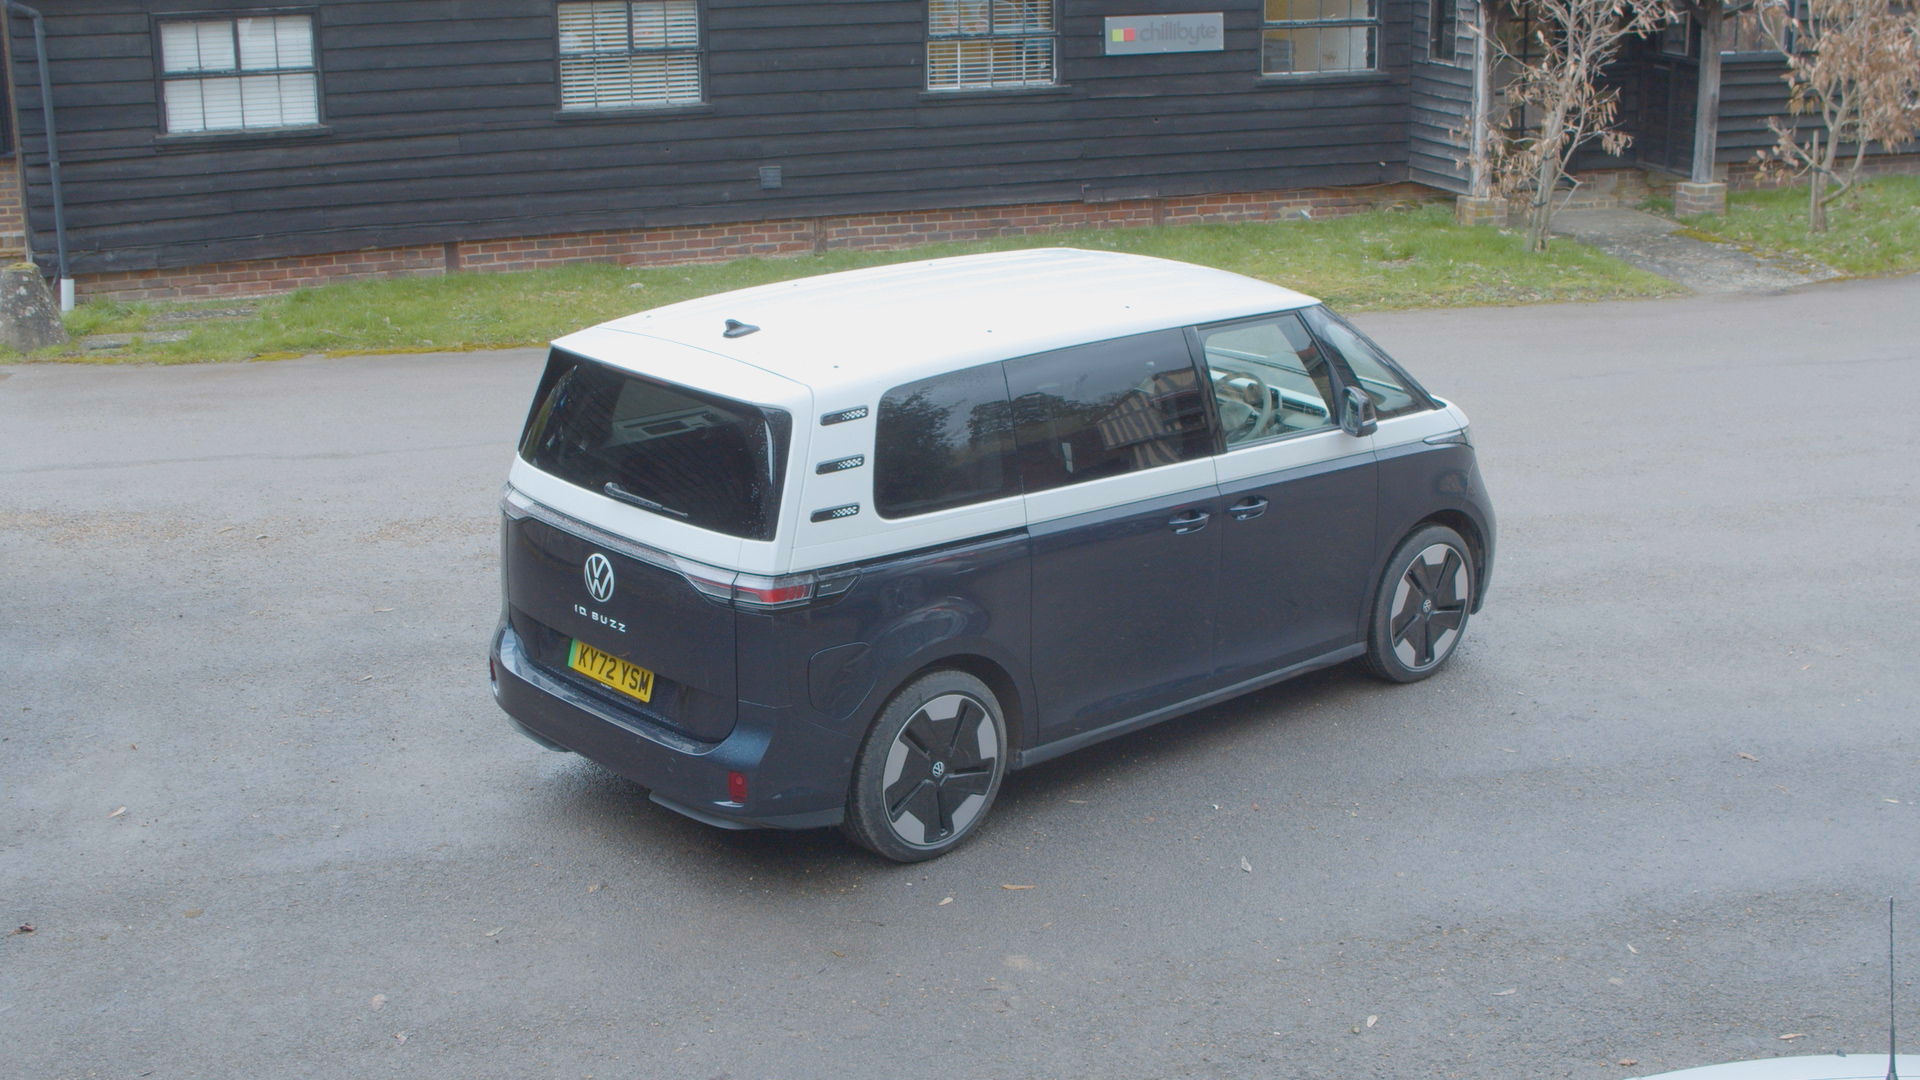 VOLKSWAGEN ID. BUZZ ESTATE 150kW Style Pro 77kWh 5dr Auto